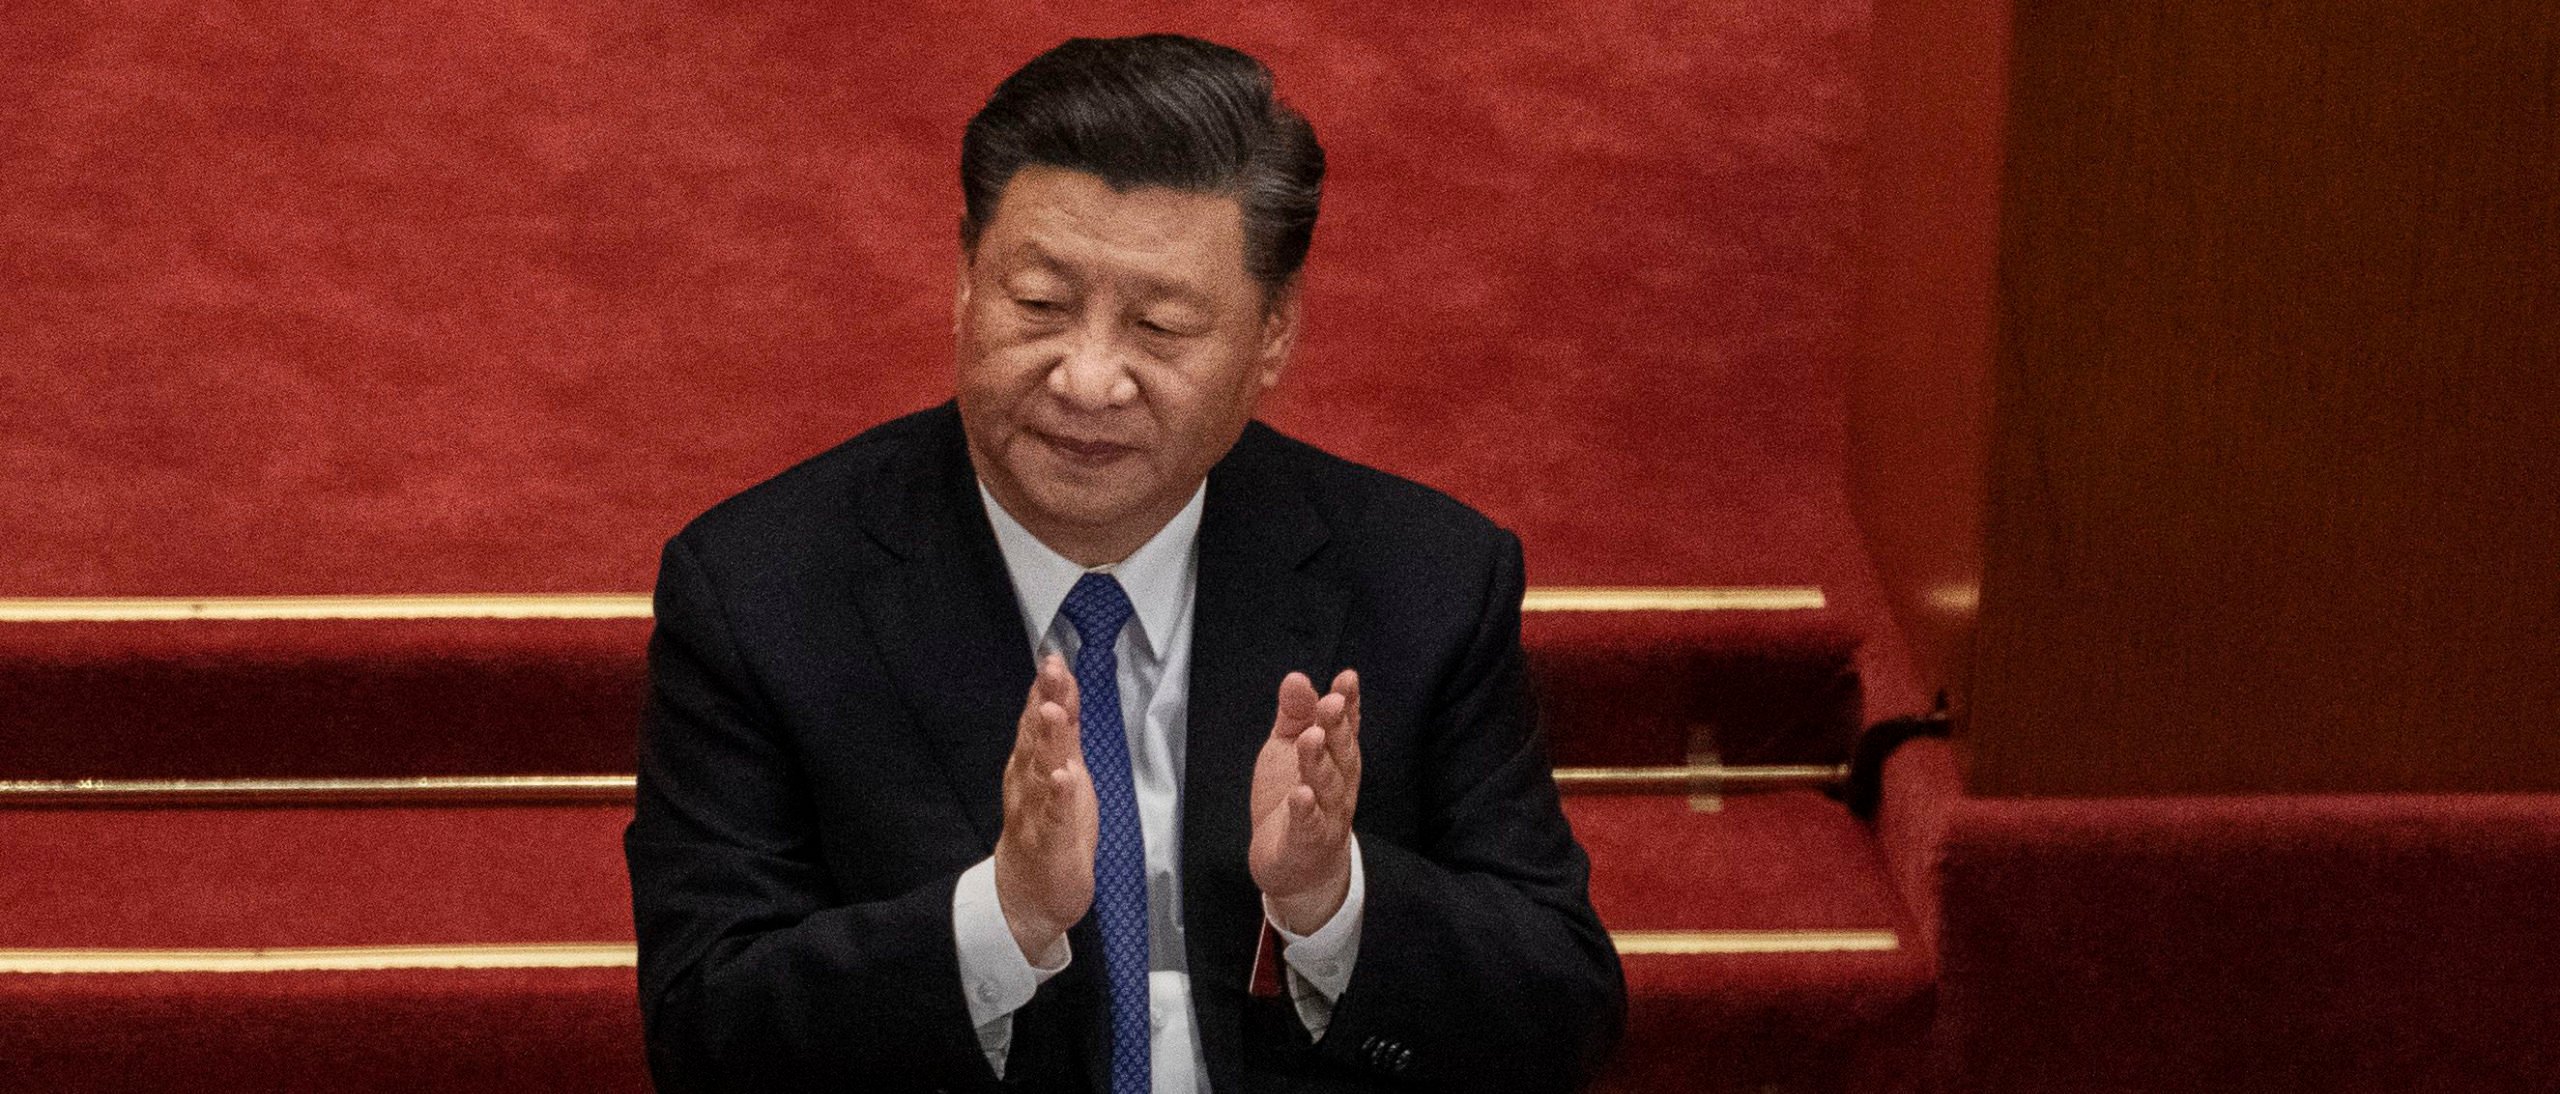 BEIJING, CHINA - MAY 28: Chinese president Xi Jinping, applauds the results of a vote on a new draft security bill for Hong Kong during the closing session of the National People's Congress at the Great Hall of the People on May 28, 2020 in Beijing, China. (Photo by Kevin Frayer/Getty Images)